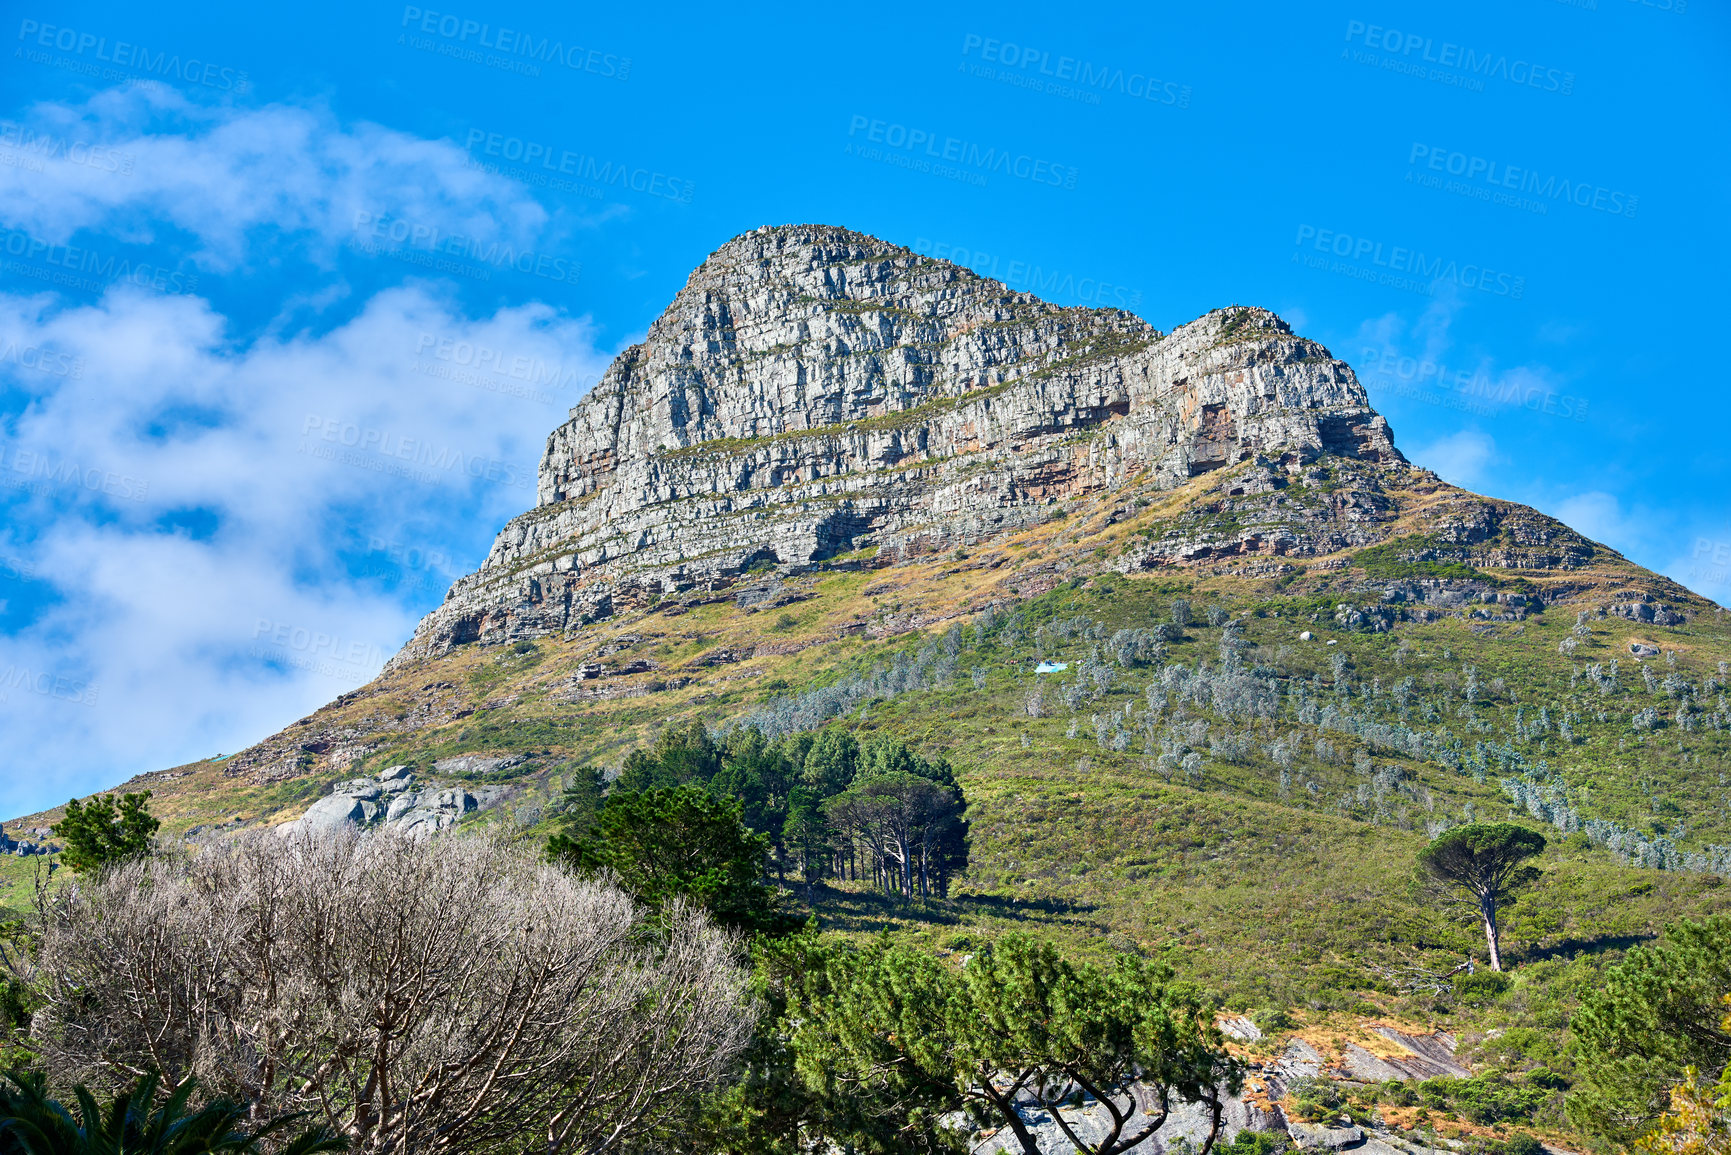 Buy stock photo Copy space with scenic landscape view of Lions Head mountain in Cape Town, South Africa against a blue sky background. Magnificent panoramic of a famous travel destination with lush trees and plants
